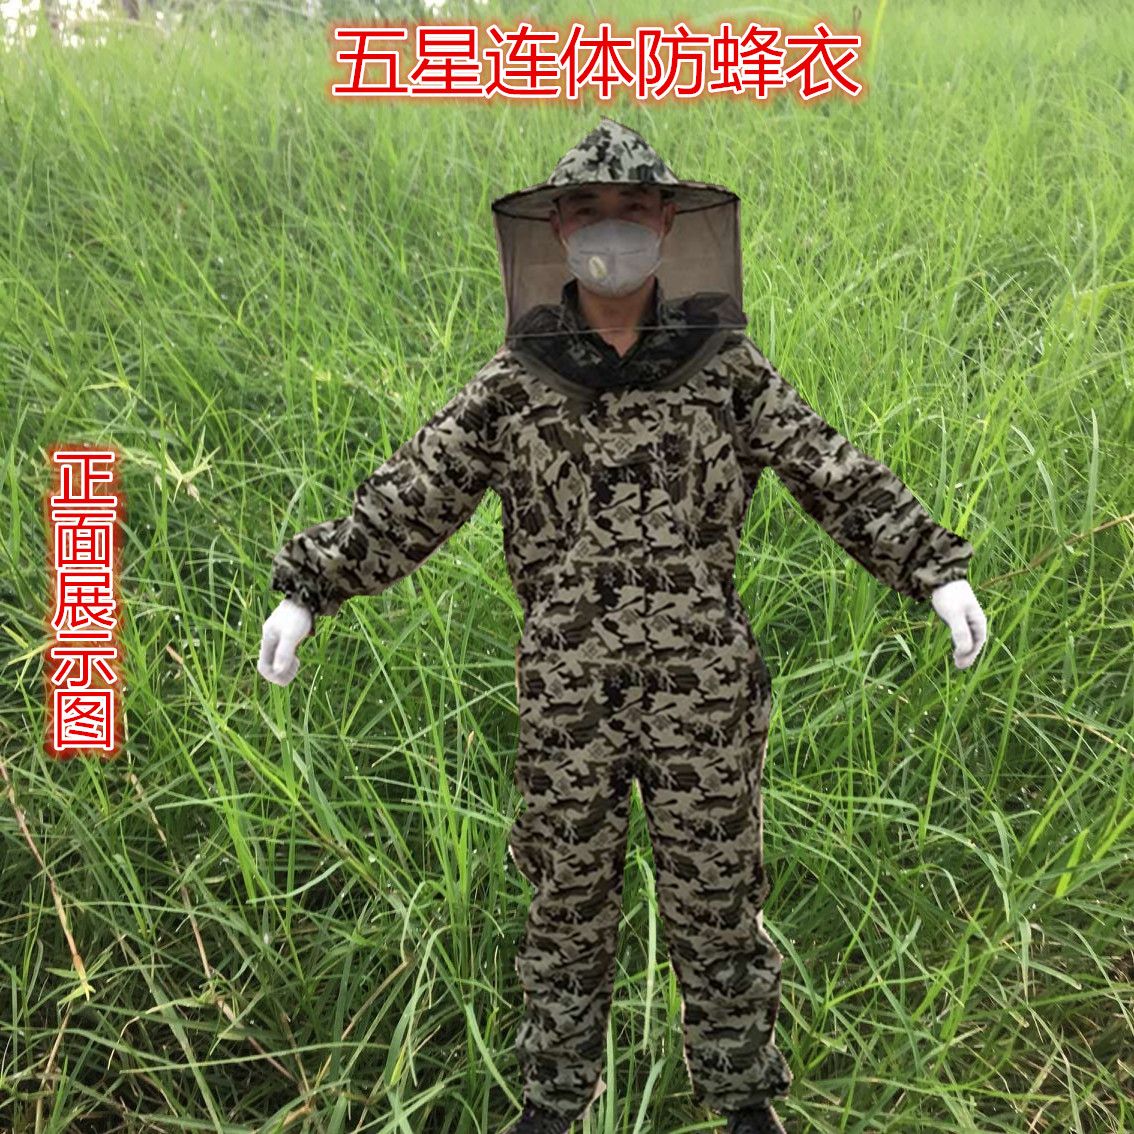 Bee clothing camouflage anti bee clothing bee clothing bee protective clothing bee clothing bee clothing bee keeping tools